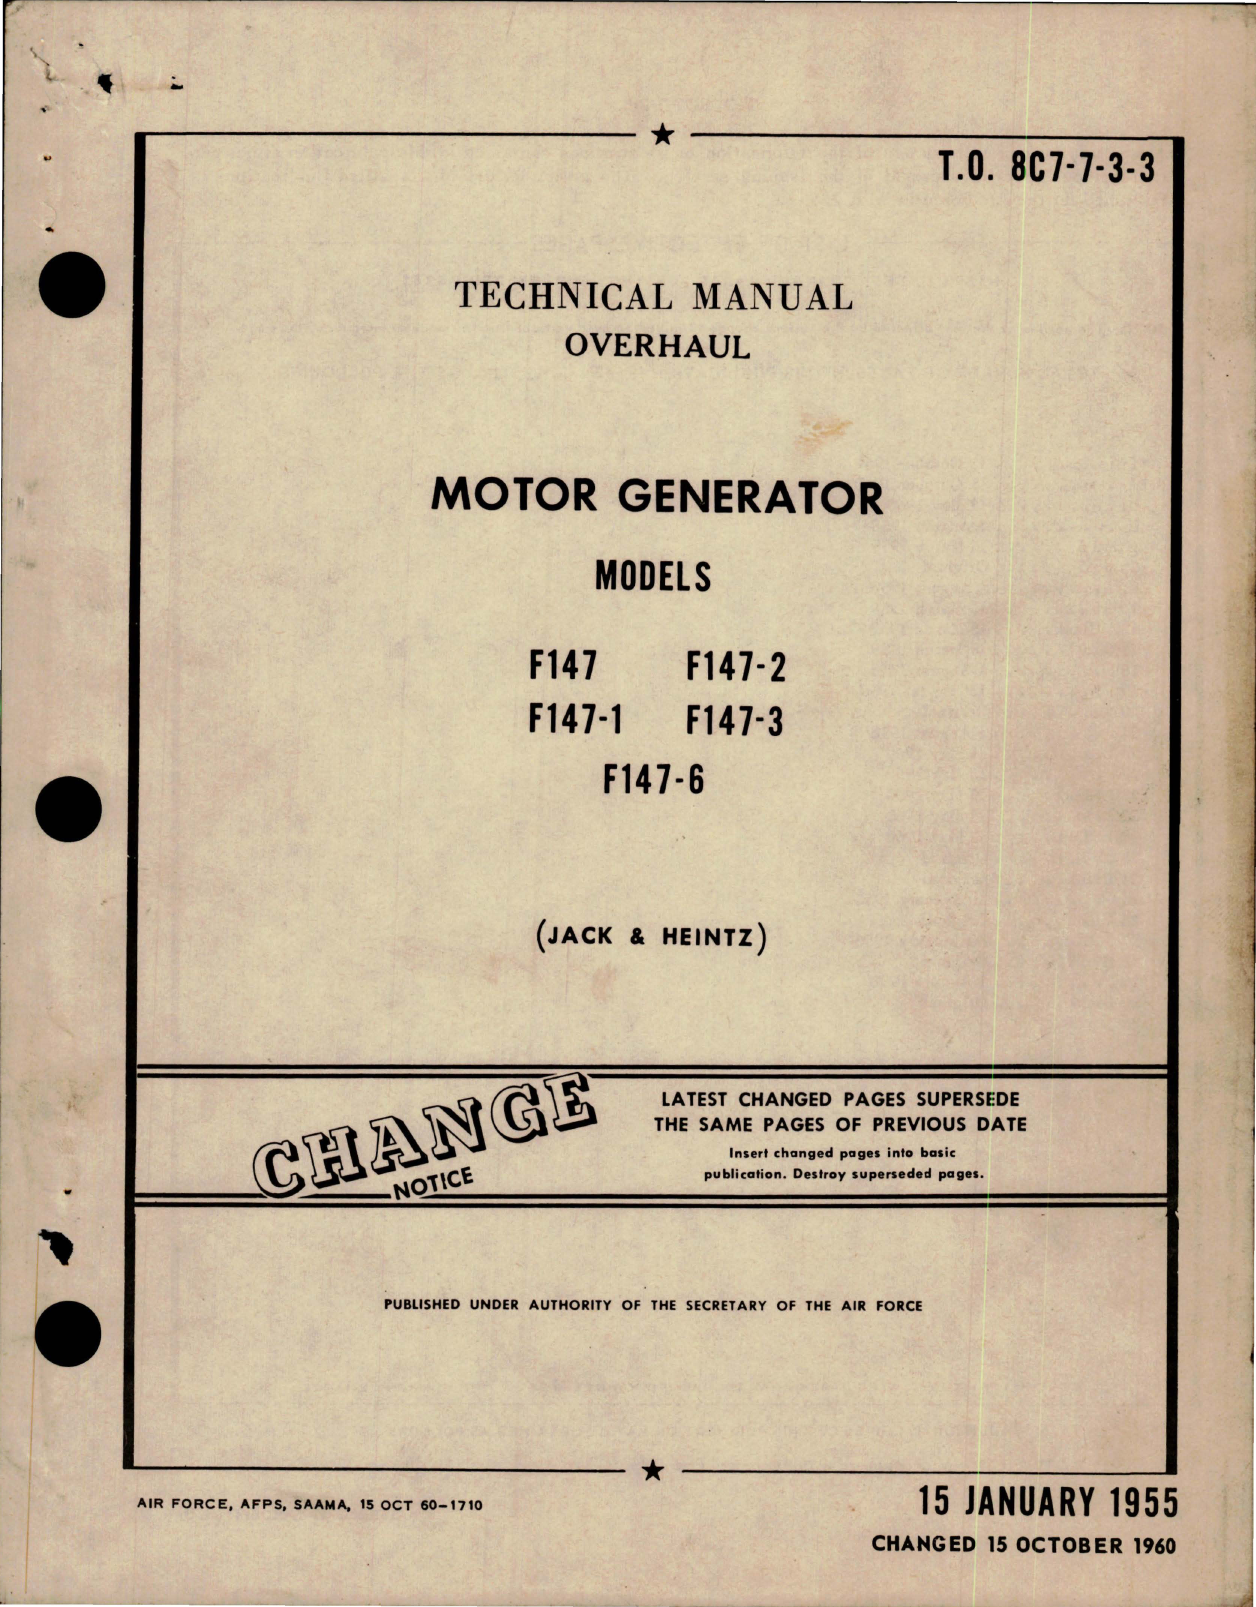 Sample page 1 from AirCorps Library document: Overhaul Manual for Motor Generator - Models F147, F147-1, F147-2, F147-3 and F147-6